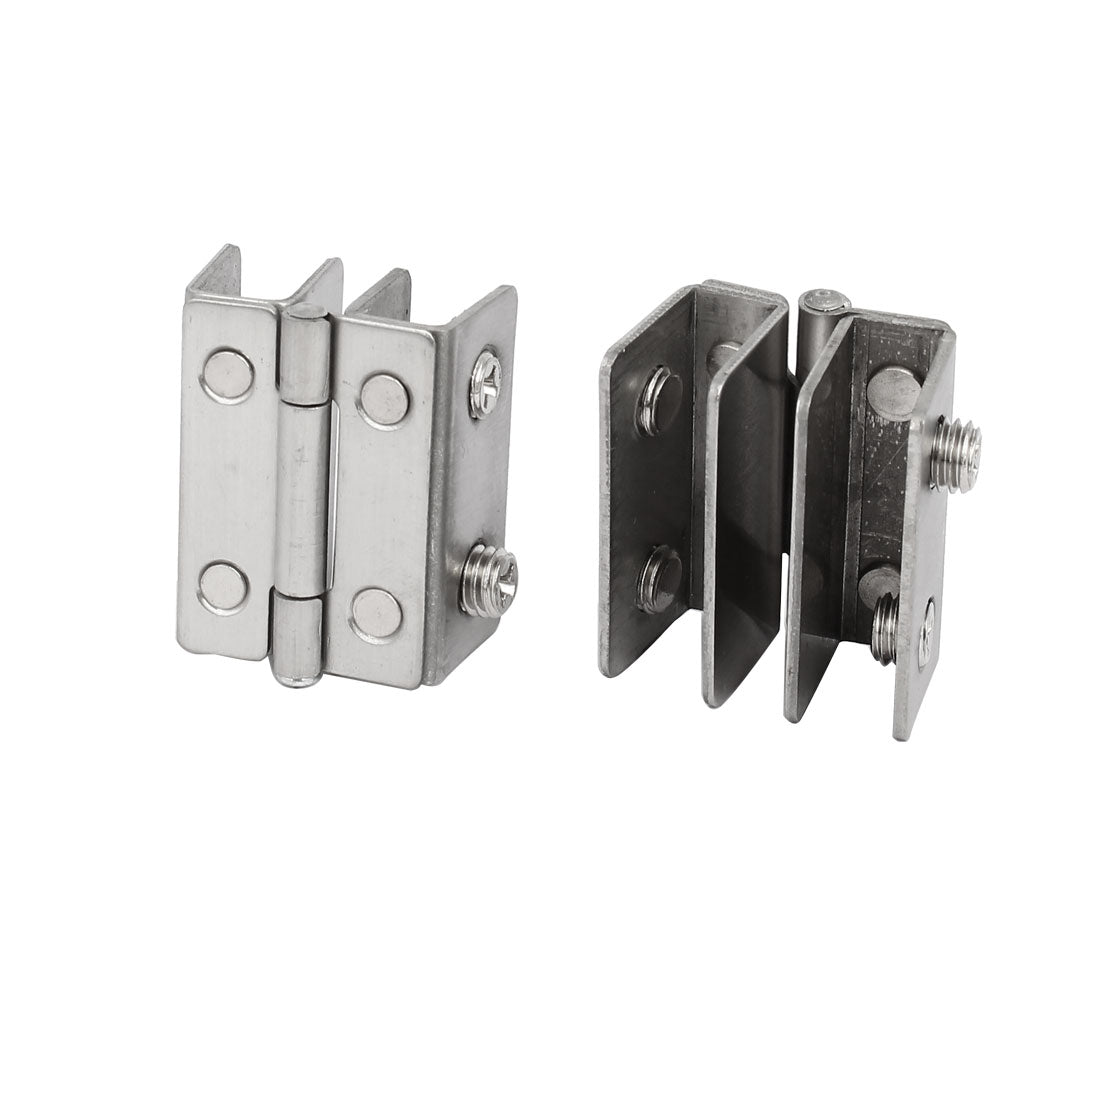 uxcell Uxcell 5-8mm Thickness Adjustable Glass Door Double Clip Clamp Hinges 4PCS